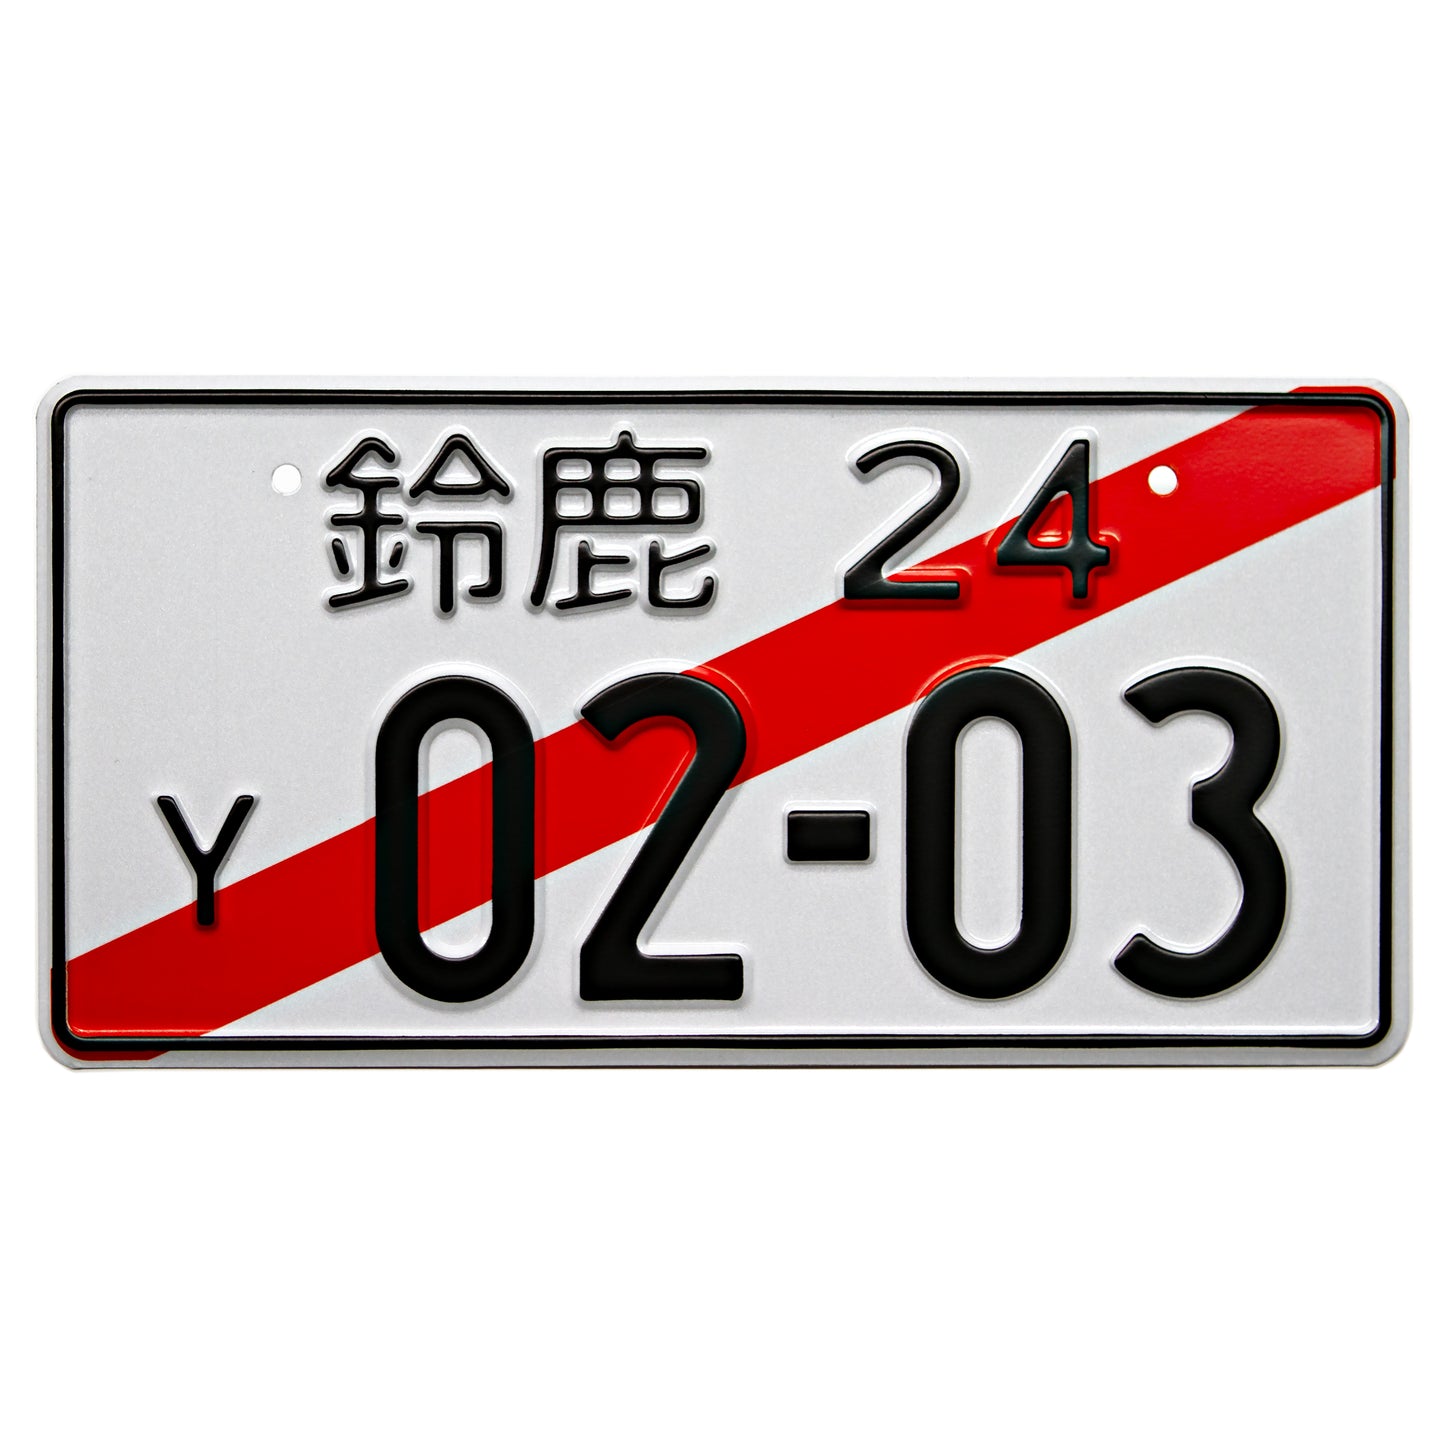 Japanese license plate temporary with black text front view